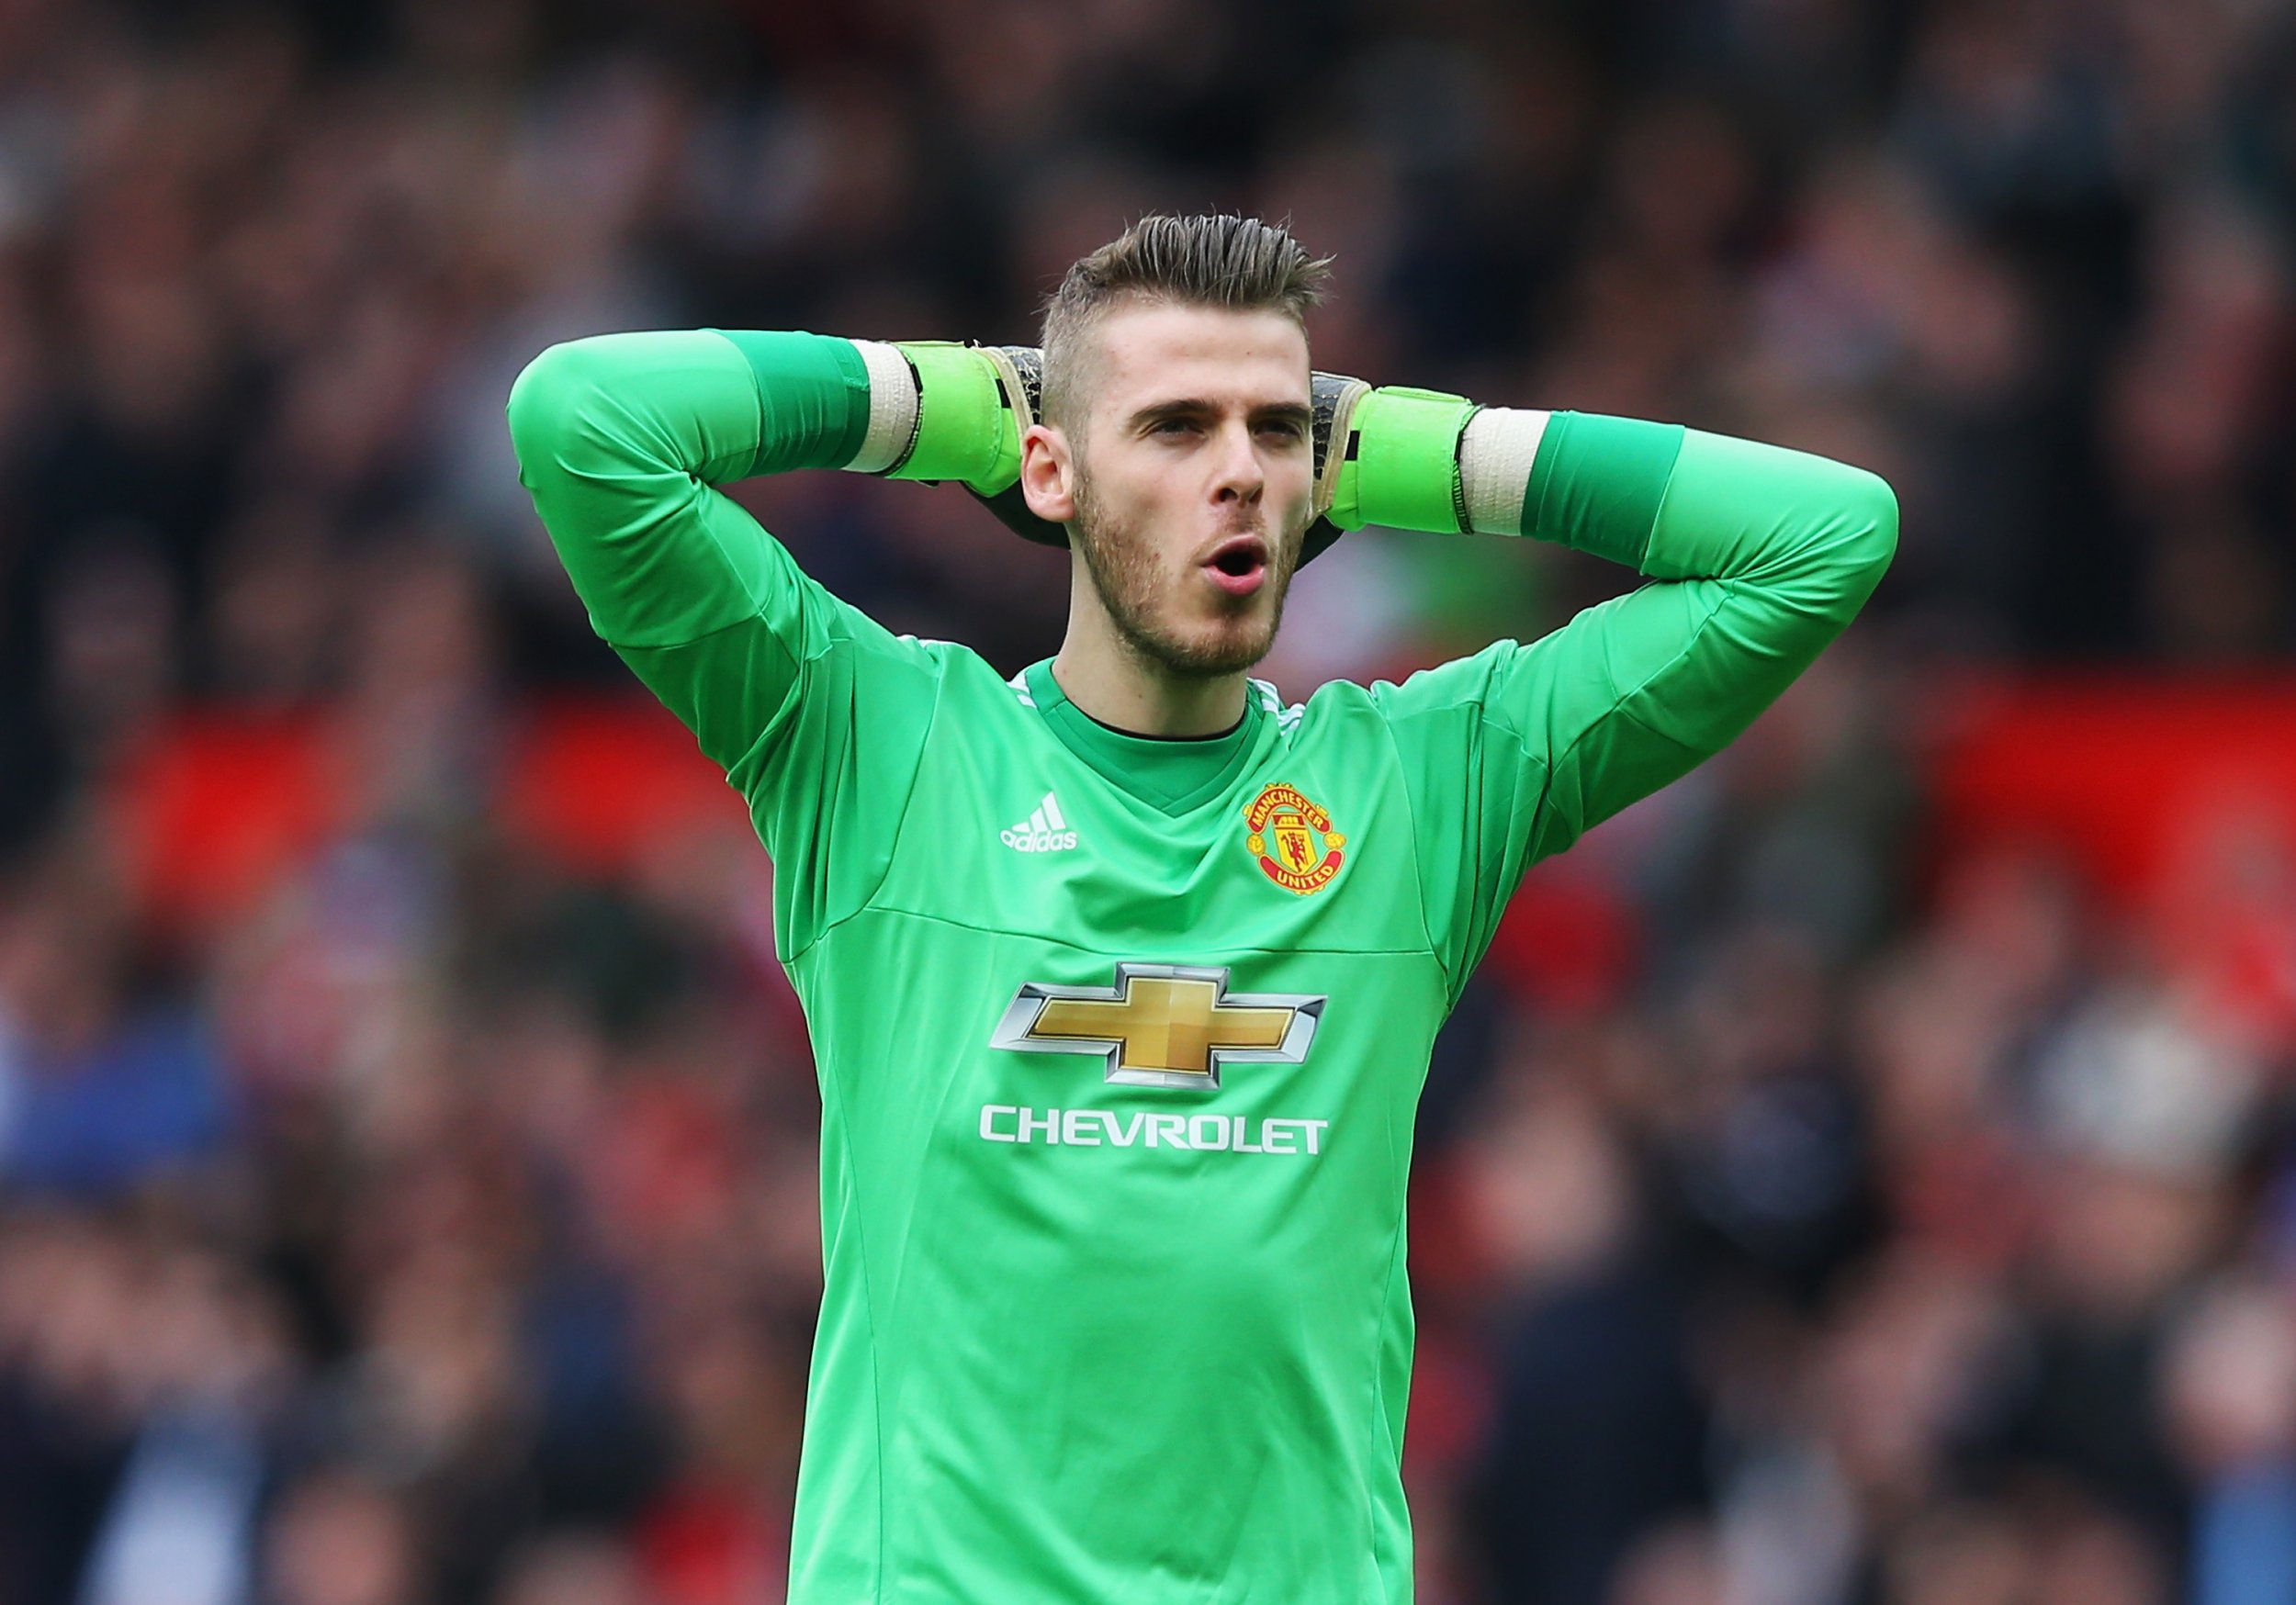 David De Gea almost moved from Manchester United to Real Madrid last summer.